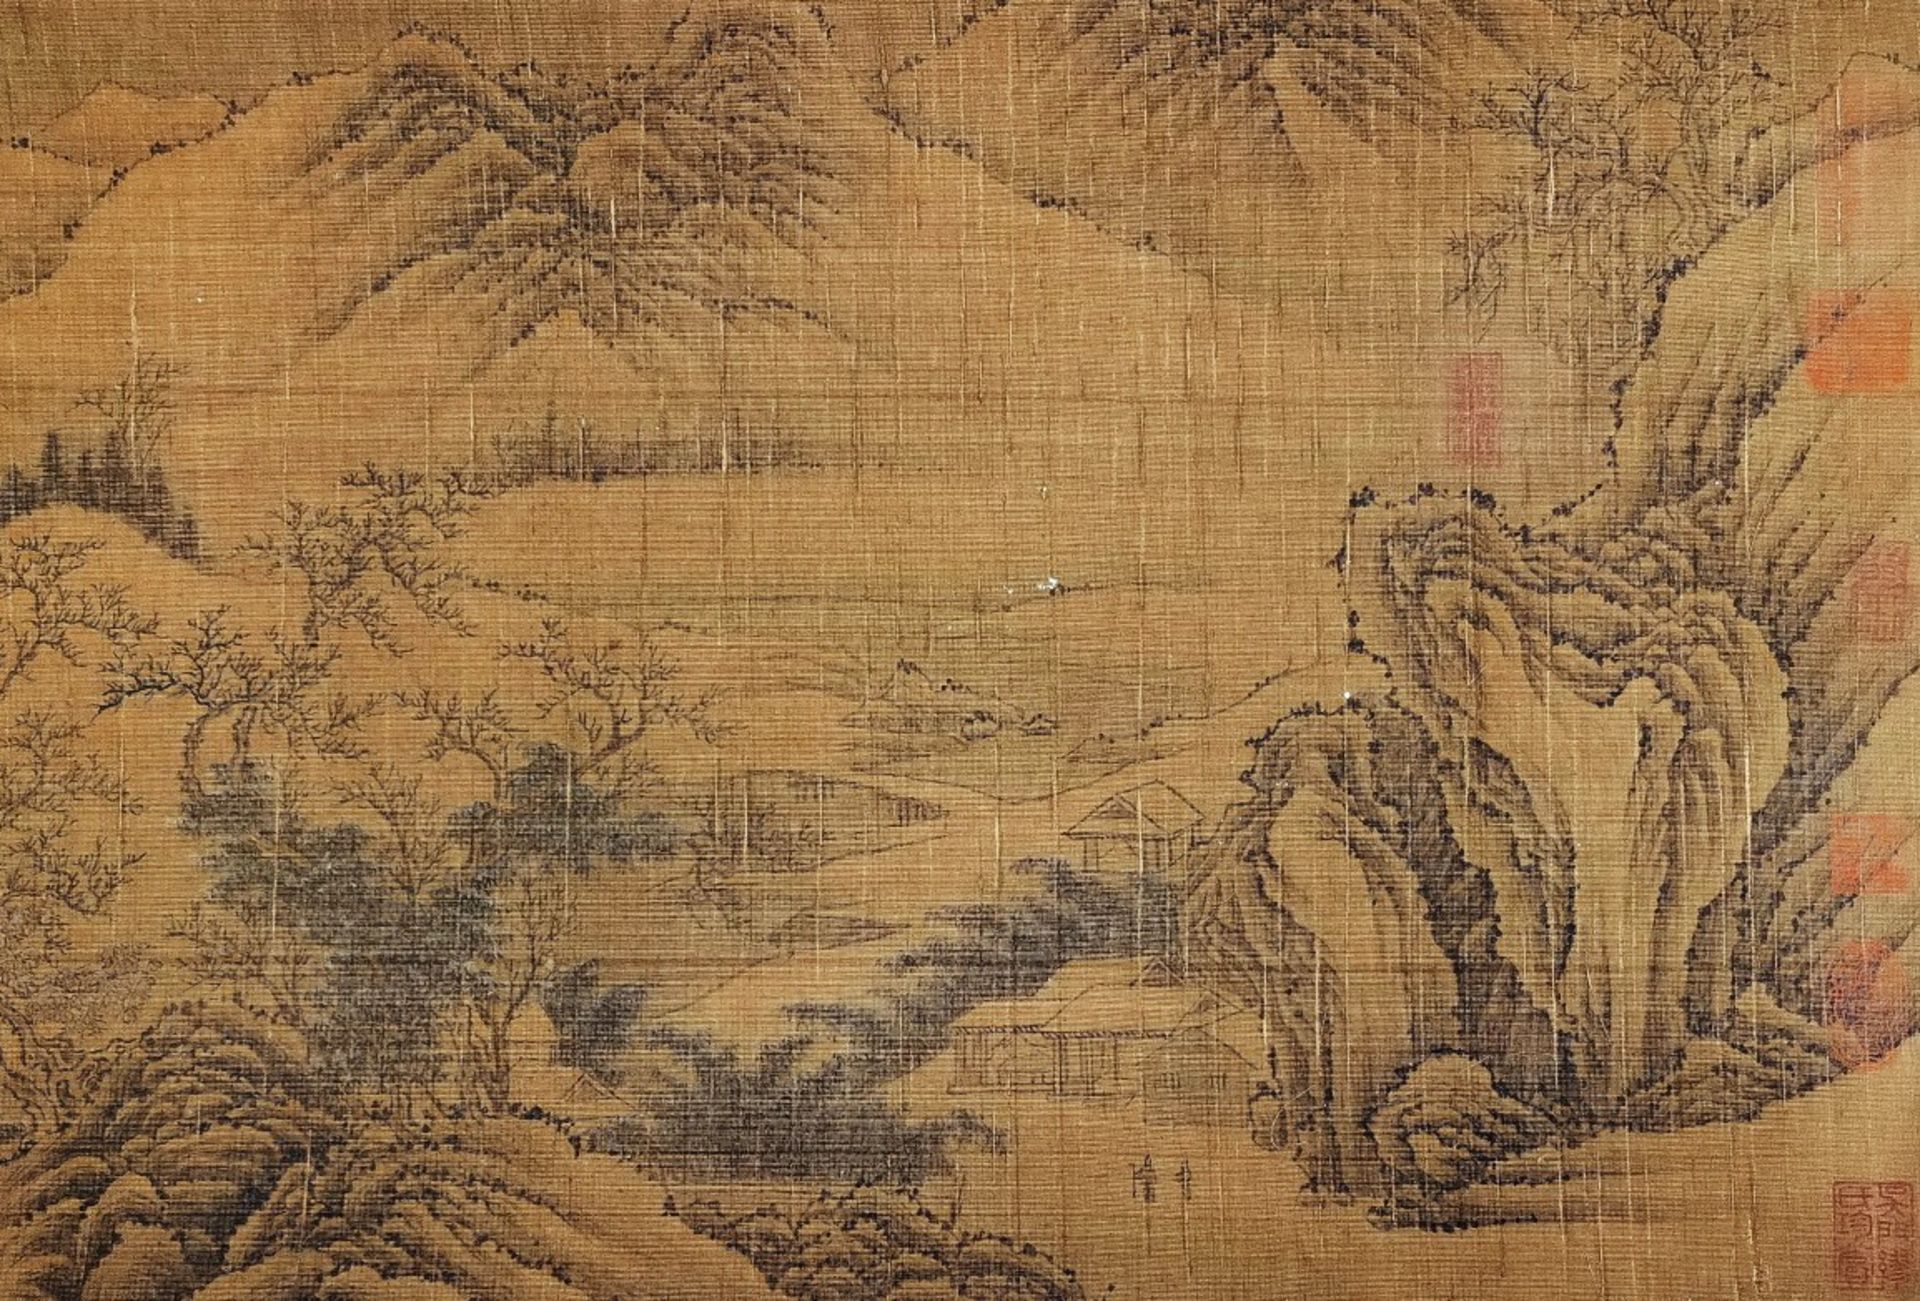 A Chinese Hand Scroll Painting By Jing Hao - Image 2 of 9